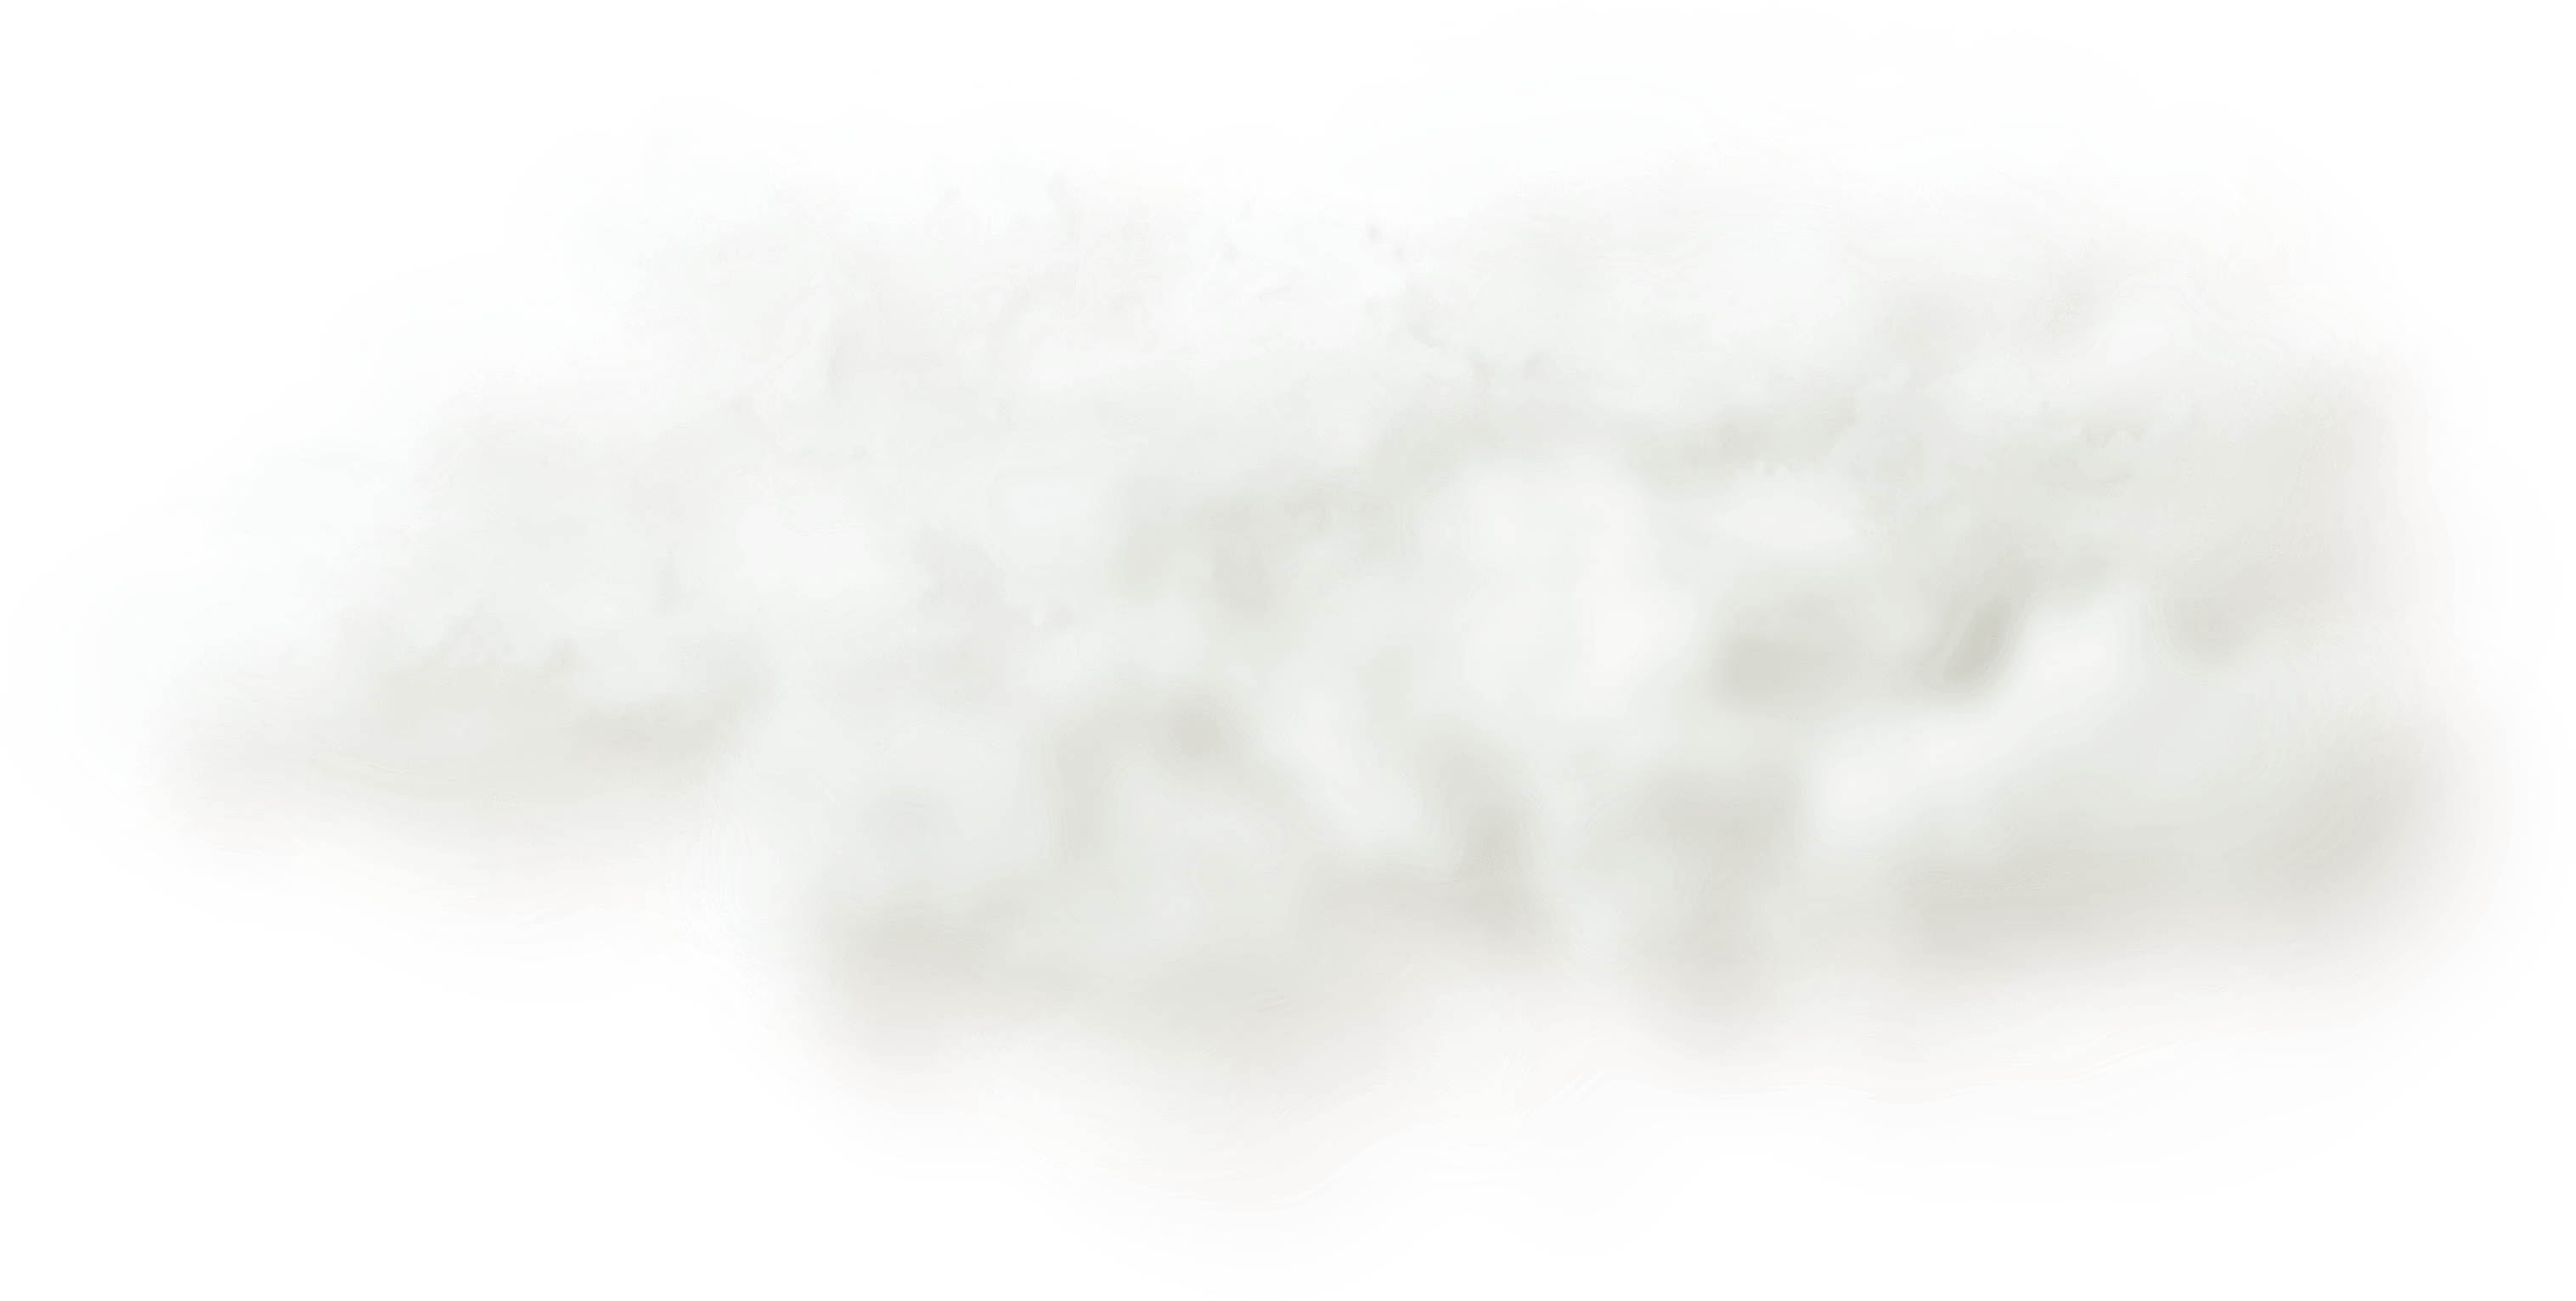 Clouds Png Hd Images Transparent Clouds Hd Imagespng Images Pluspng